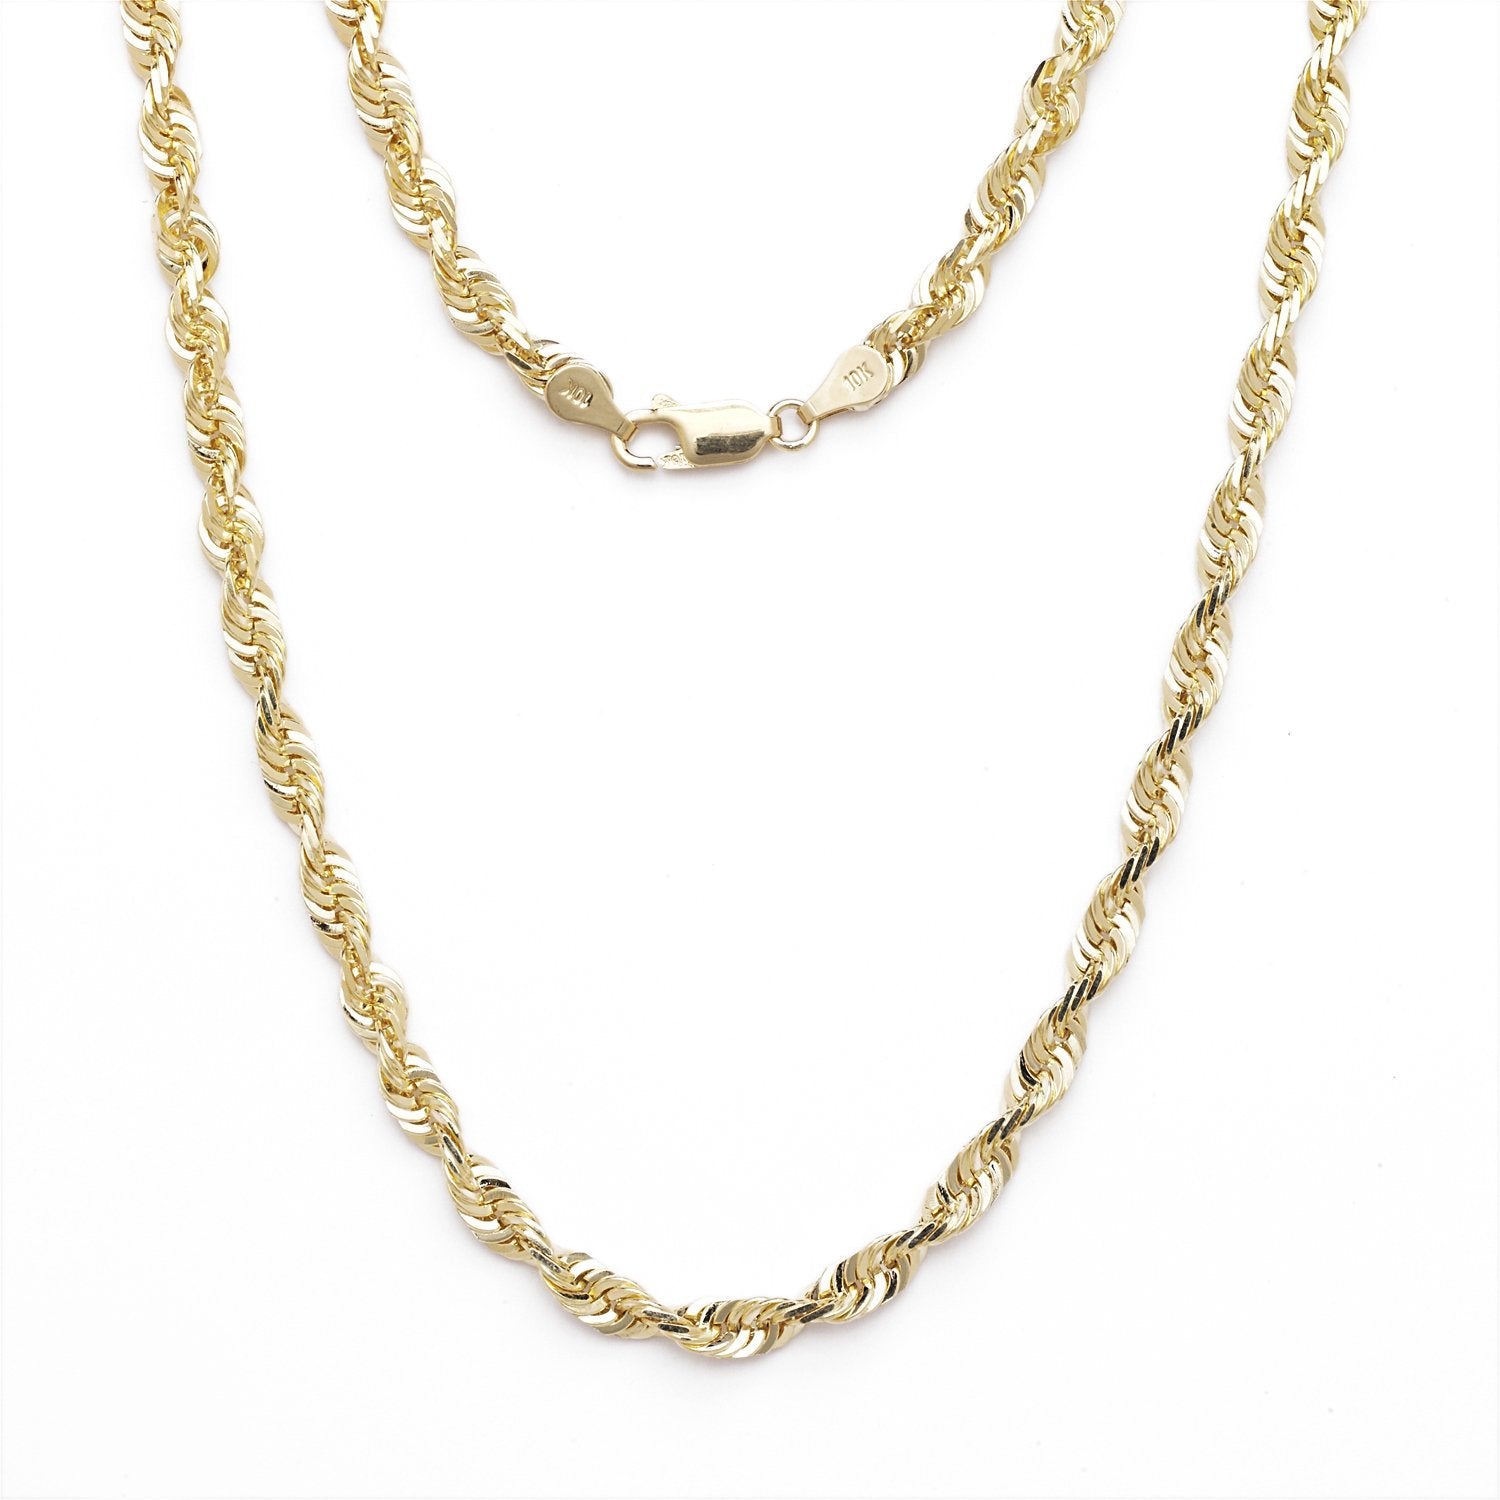 10k Yellow Gold Solid Extra Light Diamond Cut Rope Chain Necklace, 2.5mm